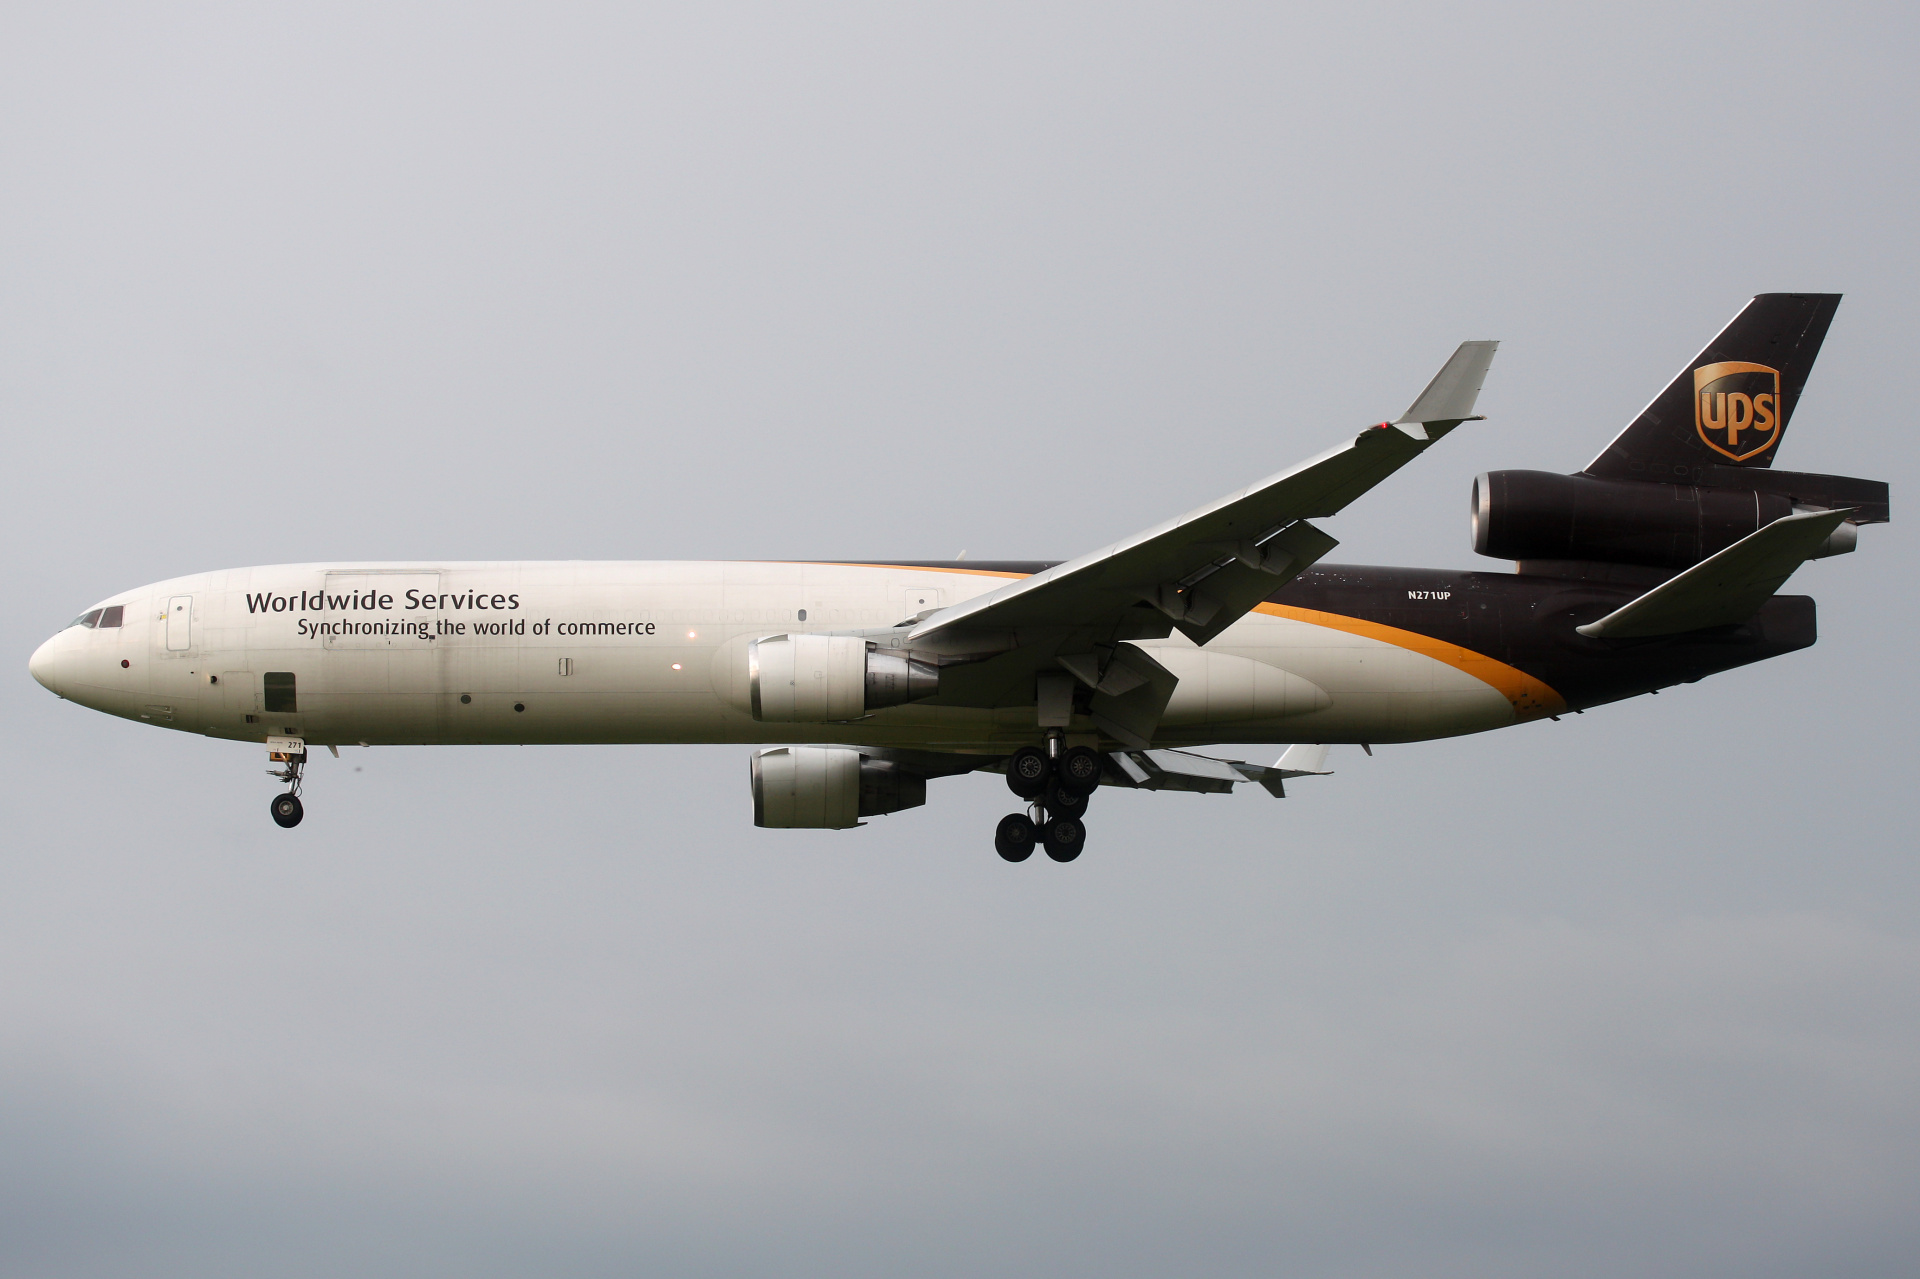 N271UP, United Parcel Service (UPS) Airlines (Aircraft » EPWA Spotting » McDonnell Douglas MD-11F)